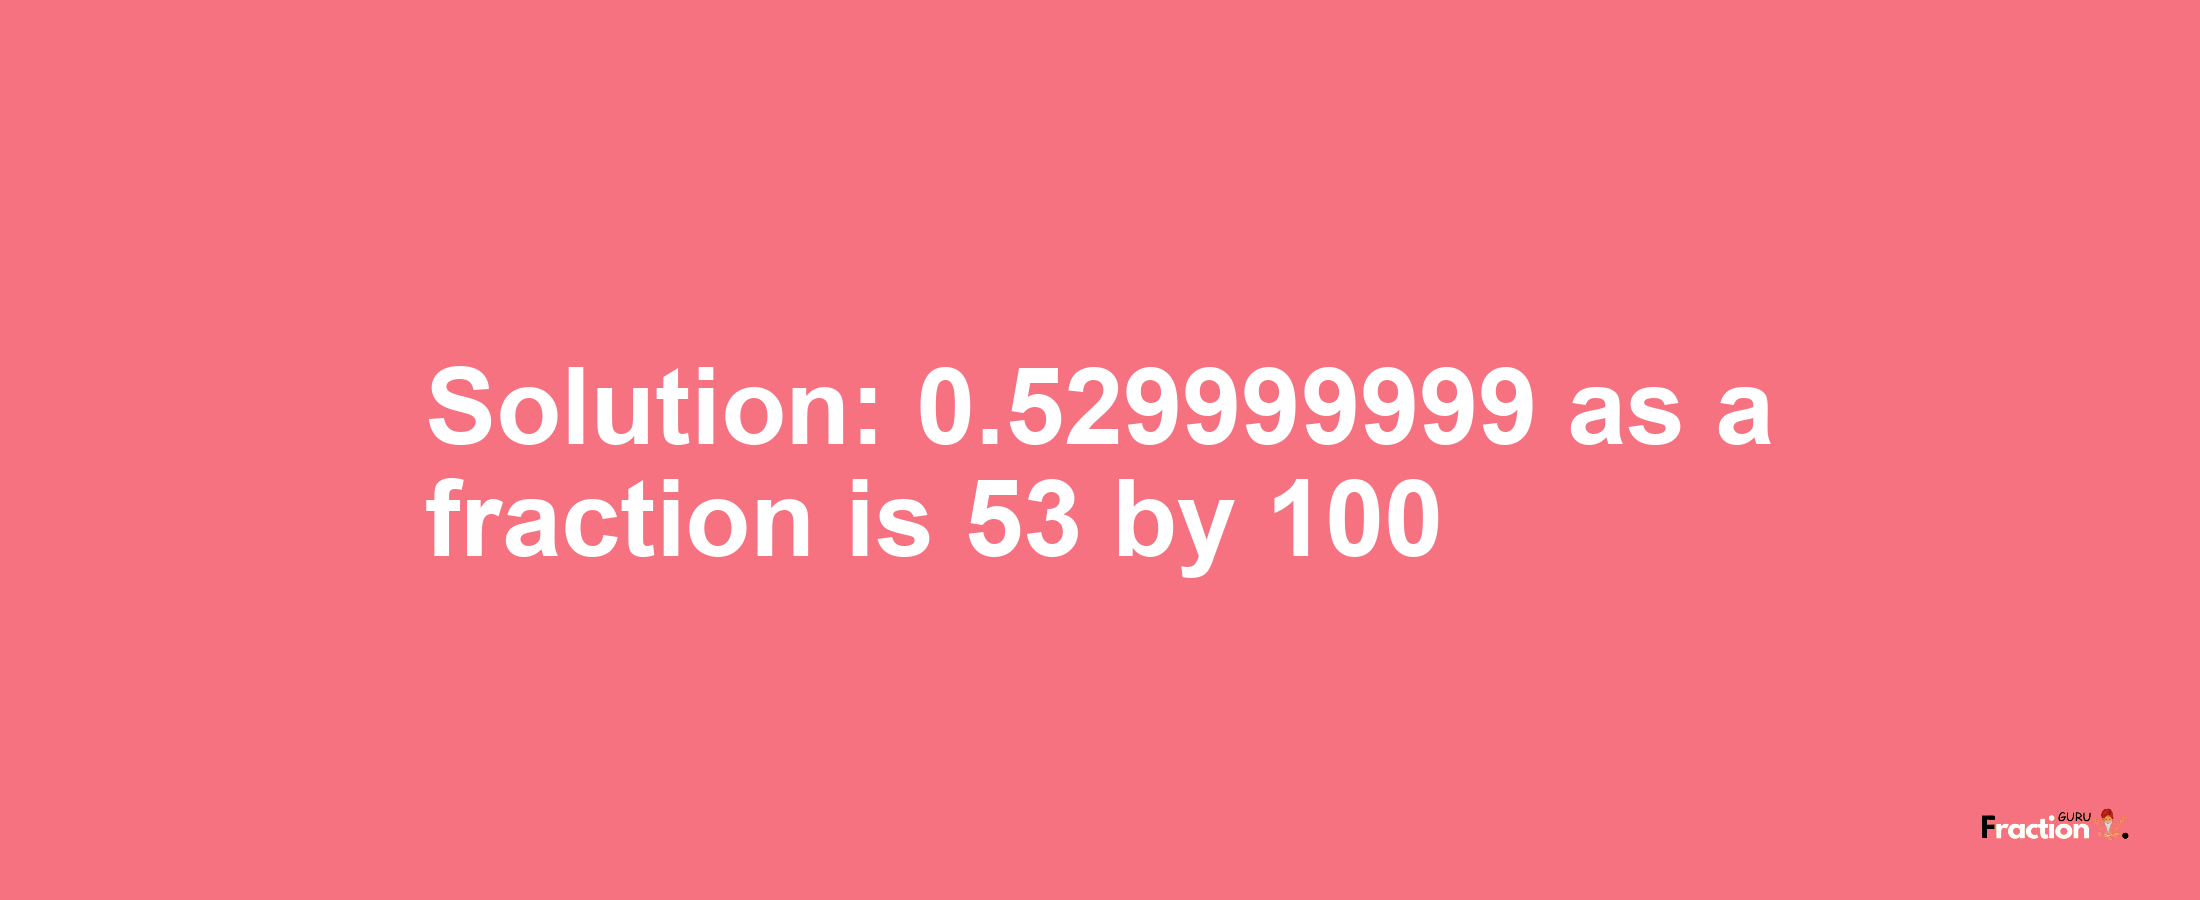 Solution:0.529999999 as a fraction is 53/100